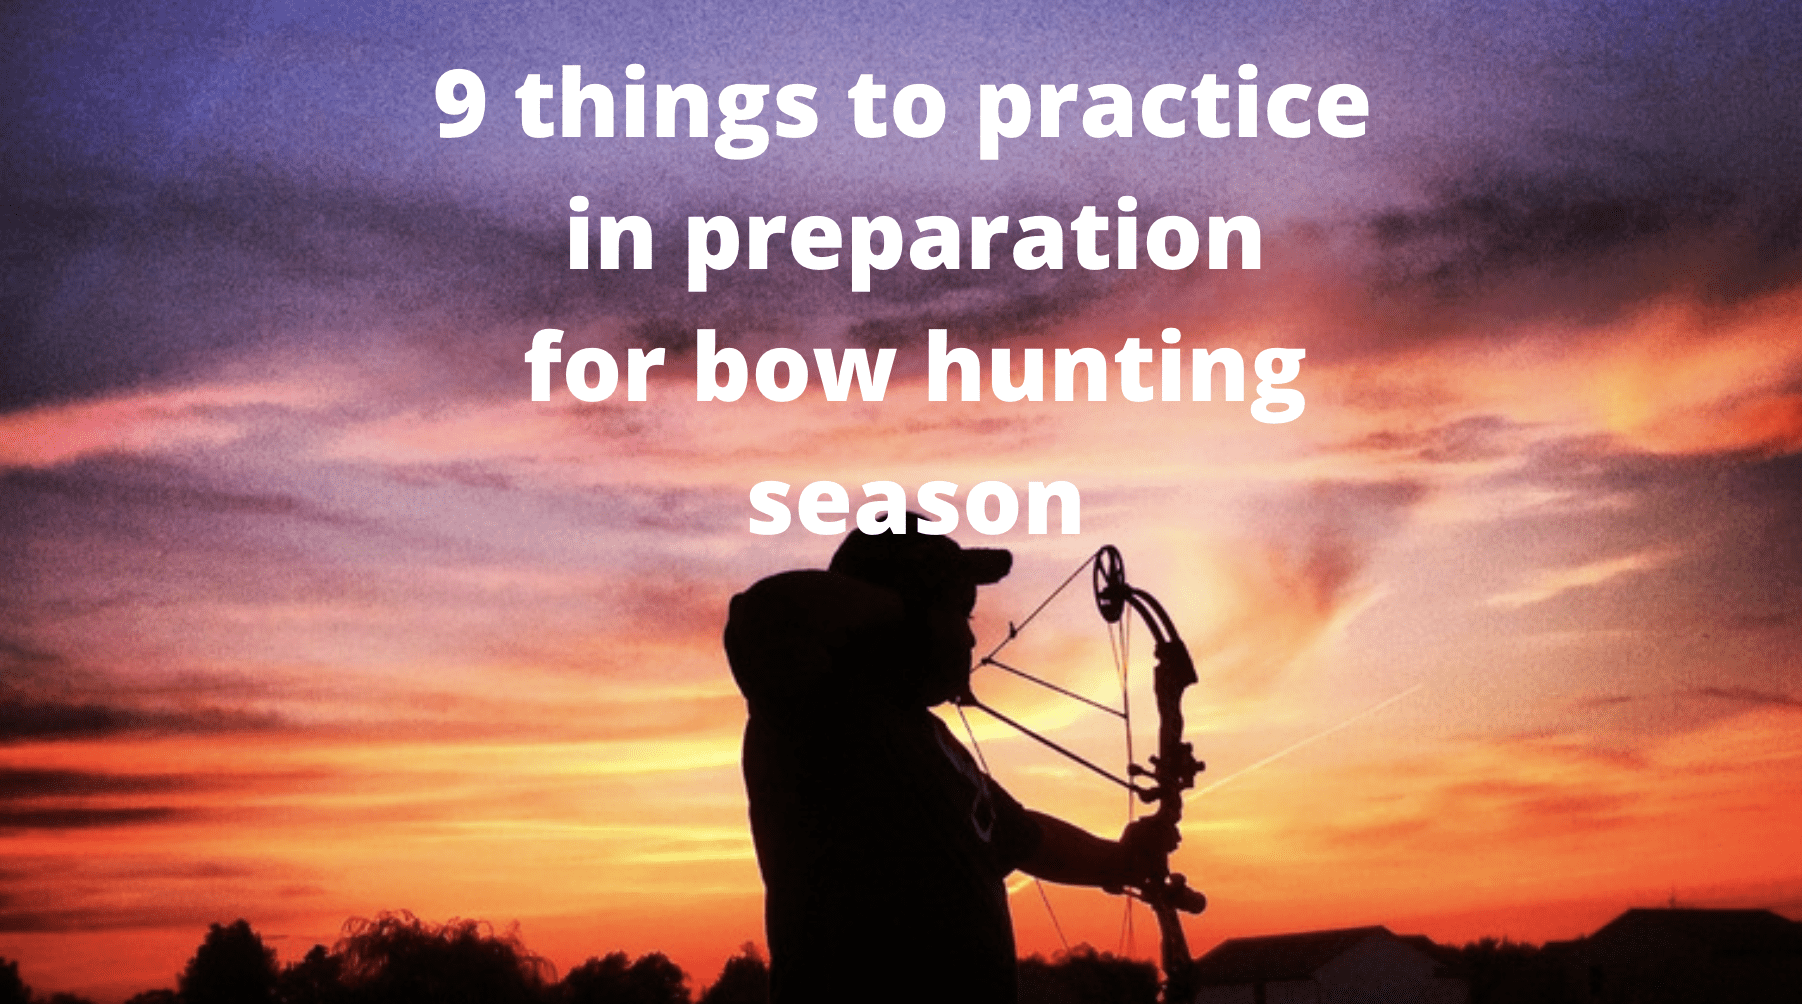 9 things to practice in preparation for bow hunting season